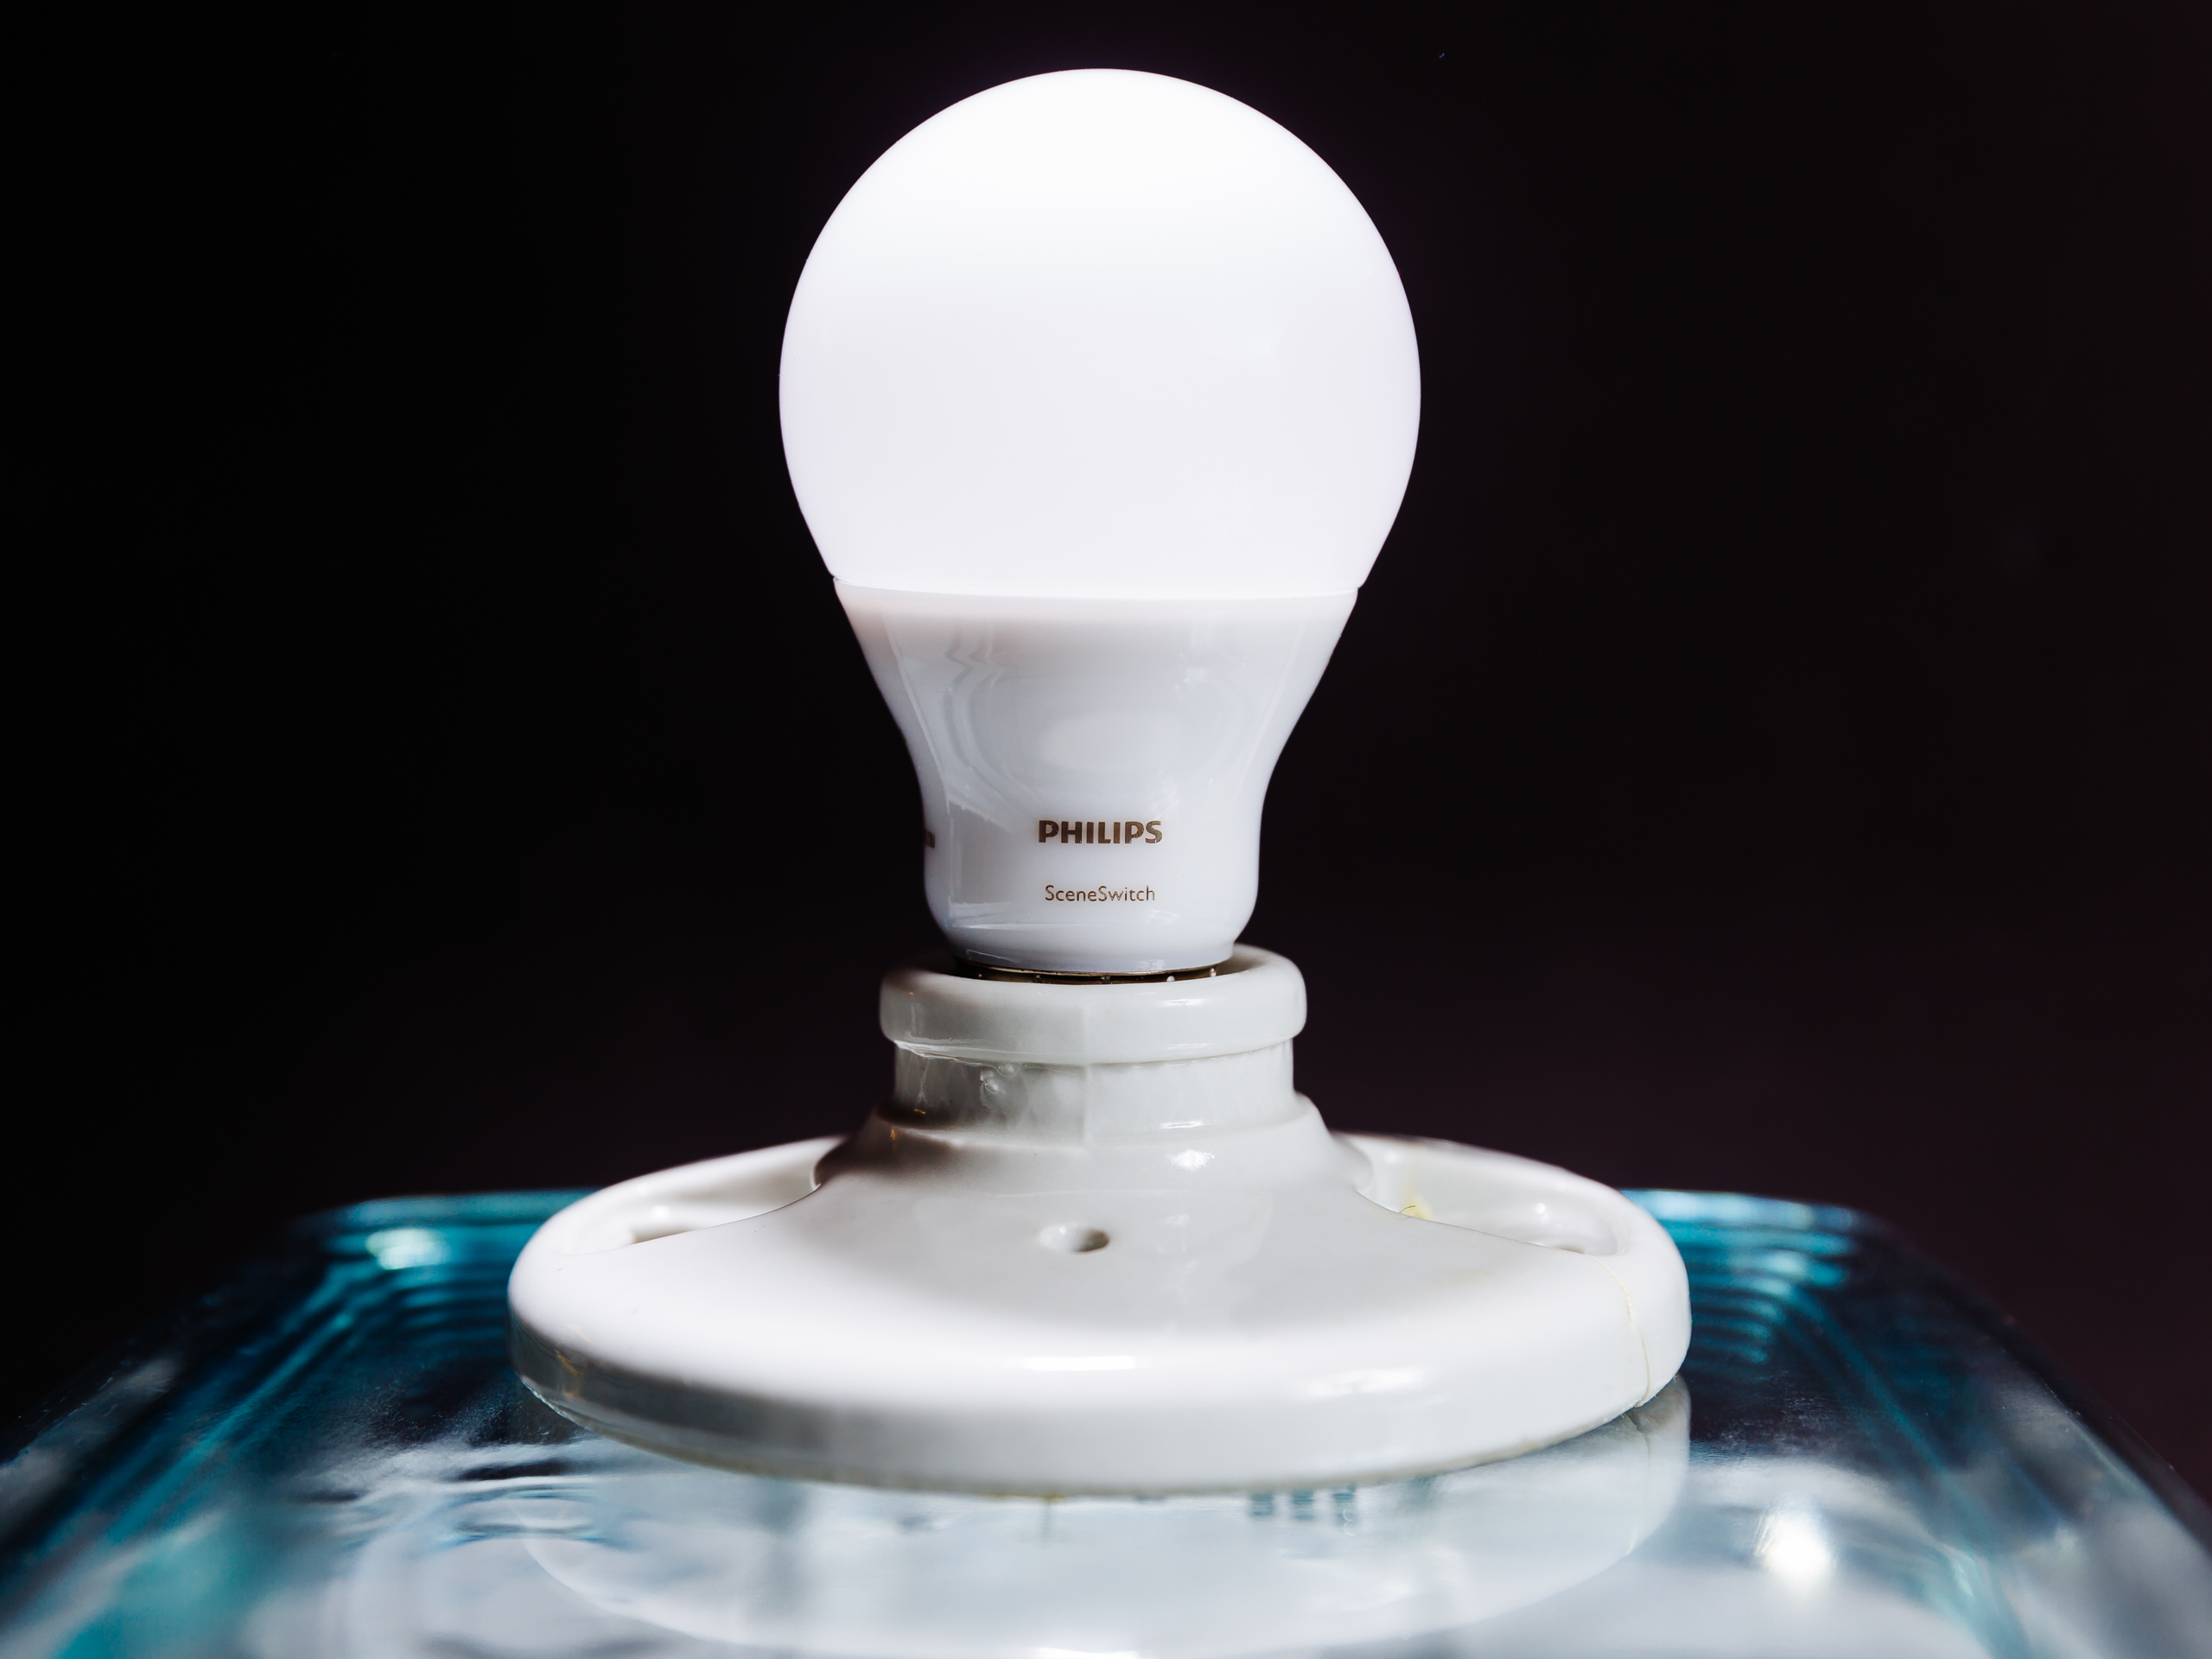 SceneSwitch 60W Equivalent LED review: These Editors' Choice-winning LED bulbs can without dimmer switches - CNET